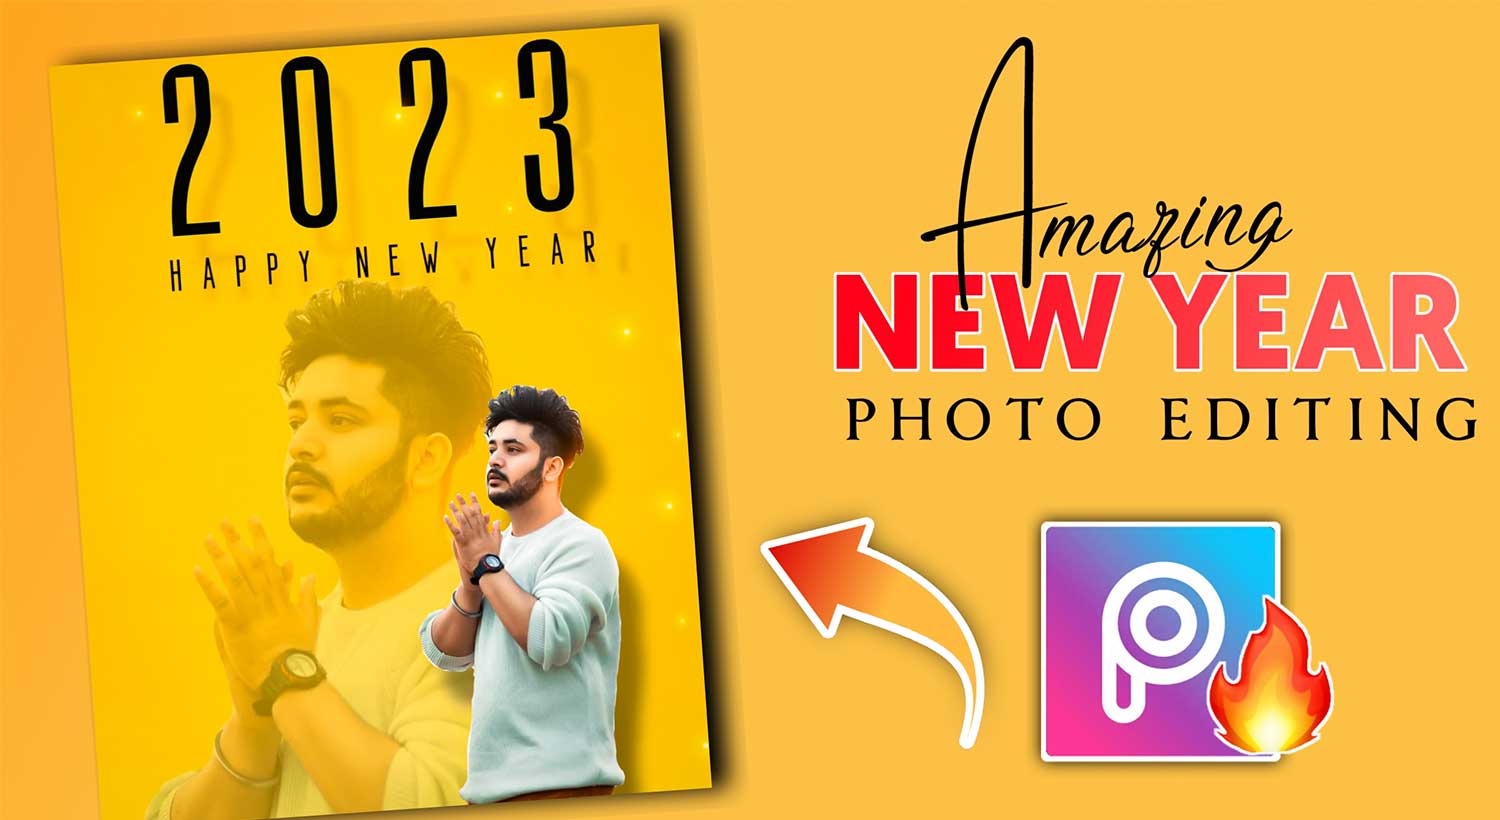 Happy New Year Background Png 2023 | Picsart Photo Editing